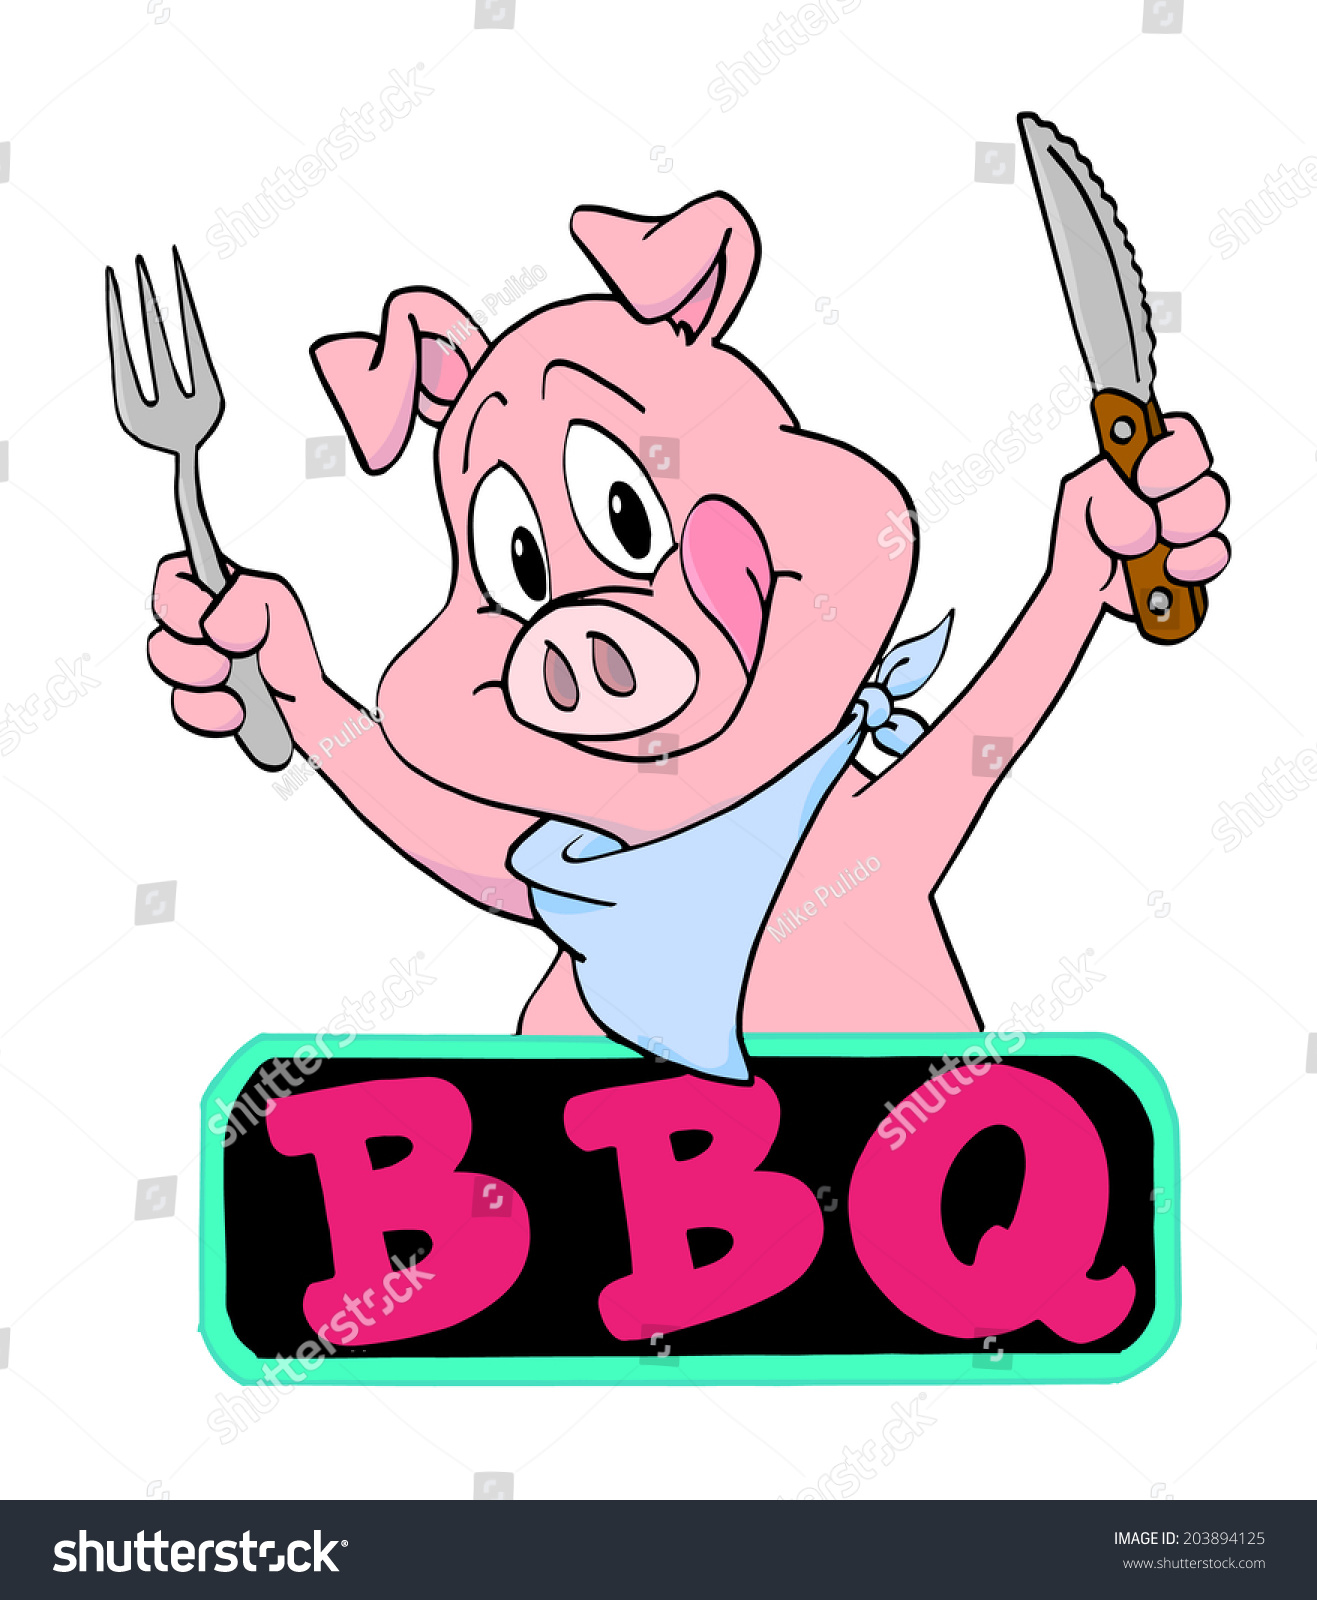 clipart pig eating - photo #14